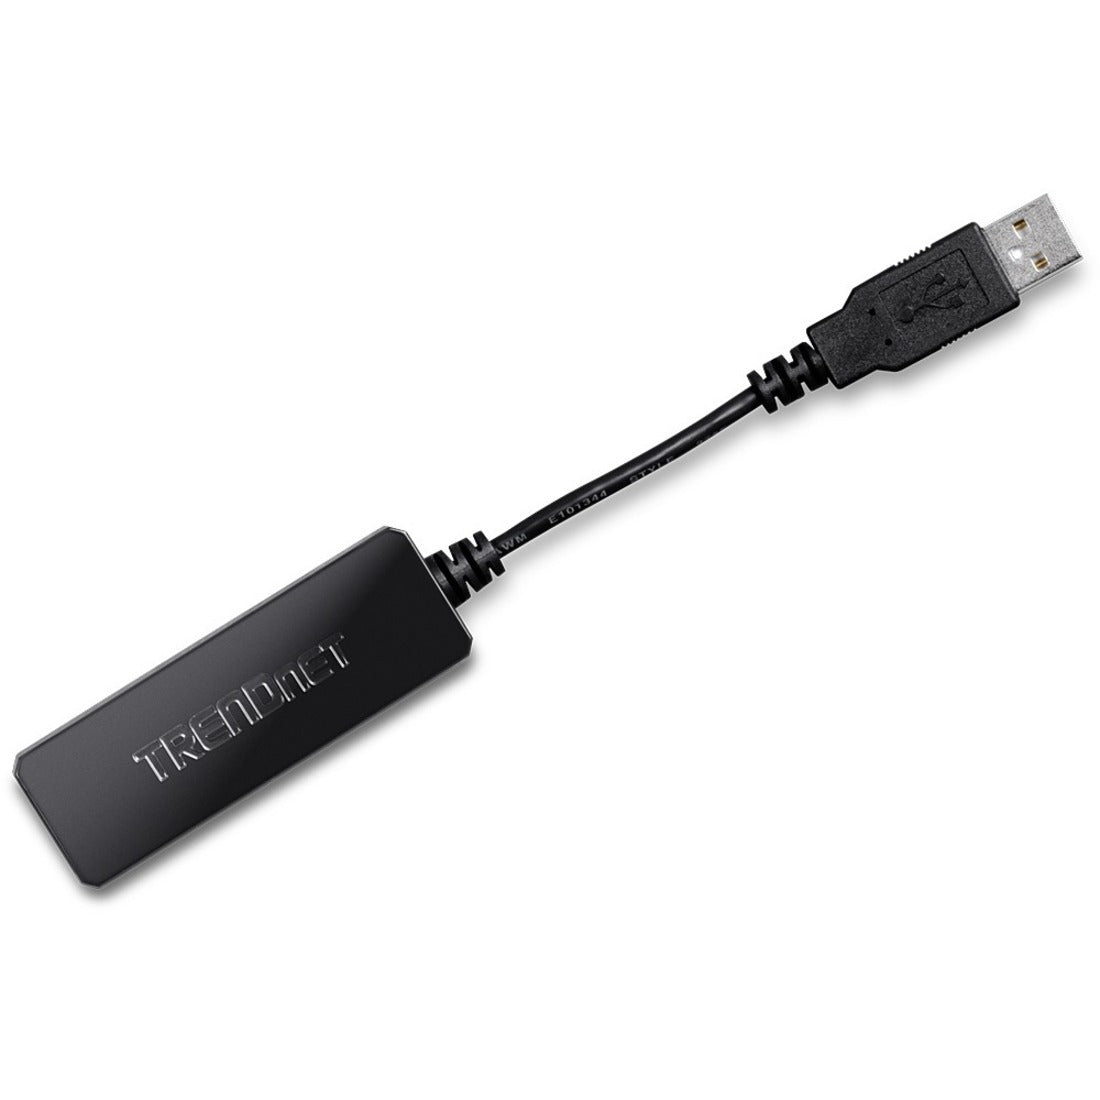 TRENDnet USB 2.0 to Fast Ethernet Adapter Supports Windows And Mac OS ASIX AX88772A Chipset Backwards Compatible With USB 1.0 And 1.0 Full Duplex 200 Mbps Ethernet Speeds Black TU2-ET100